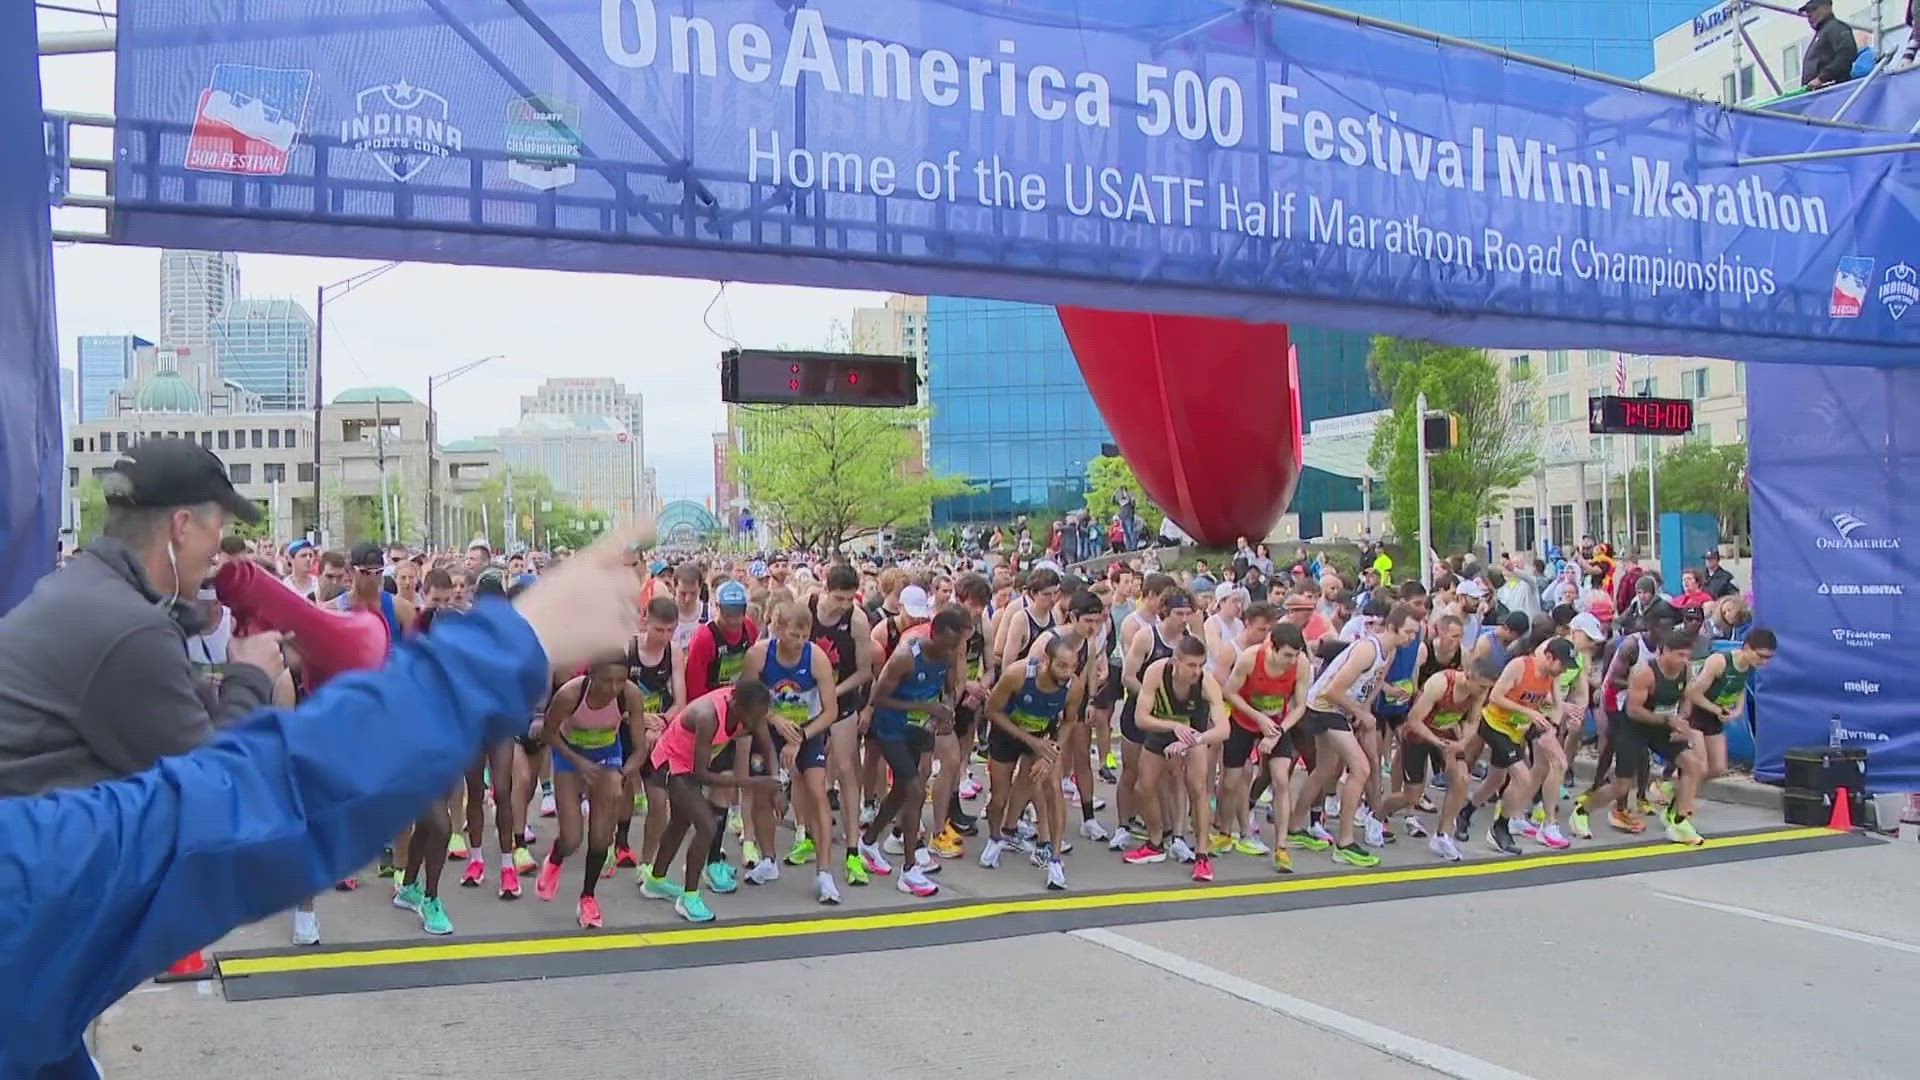 The Greatest Spectacle in Running is getting national attention. It was named the nation's best half-marathon by USA Today.